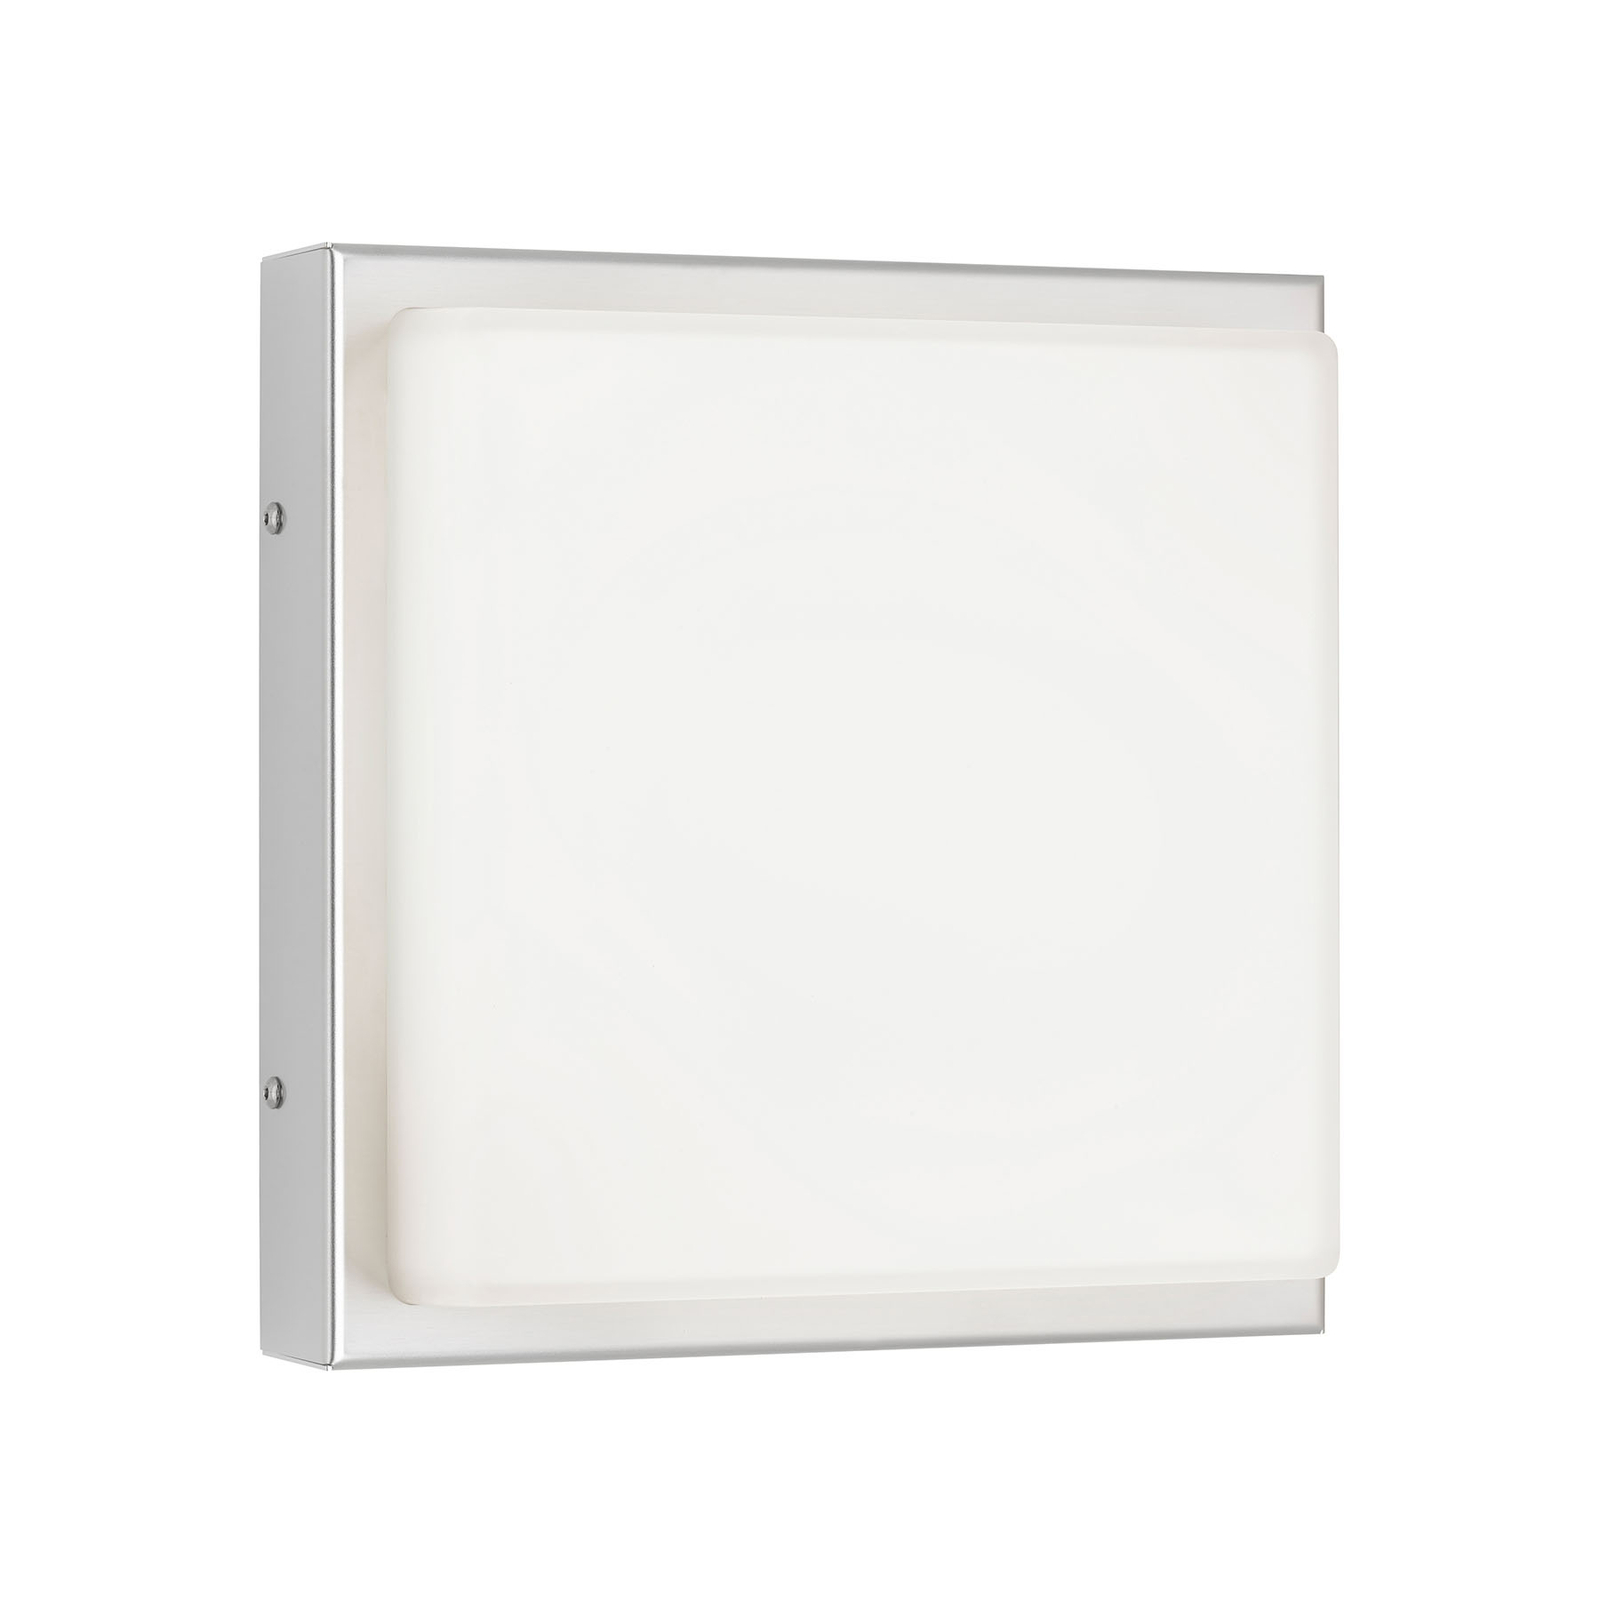 046 LED outdoor wall light, stainless steel